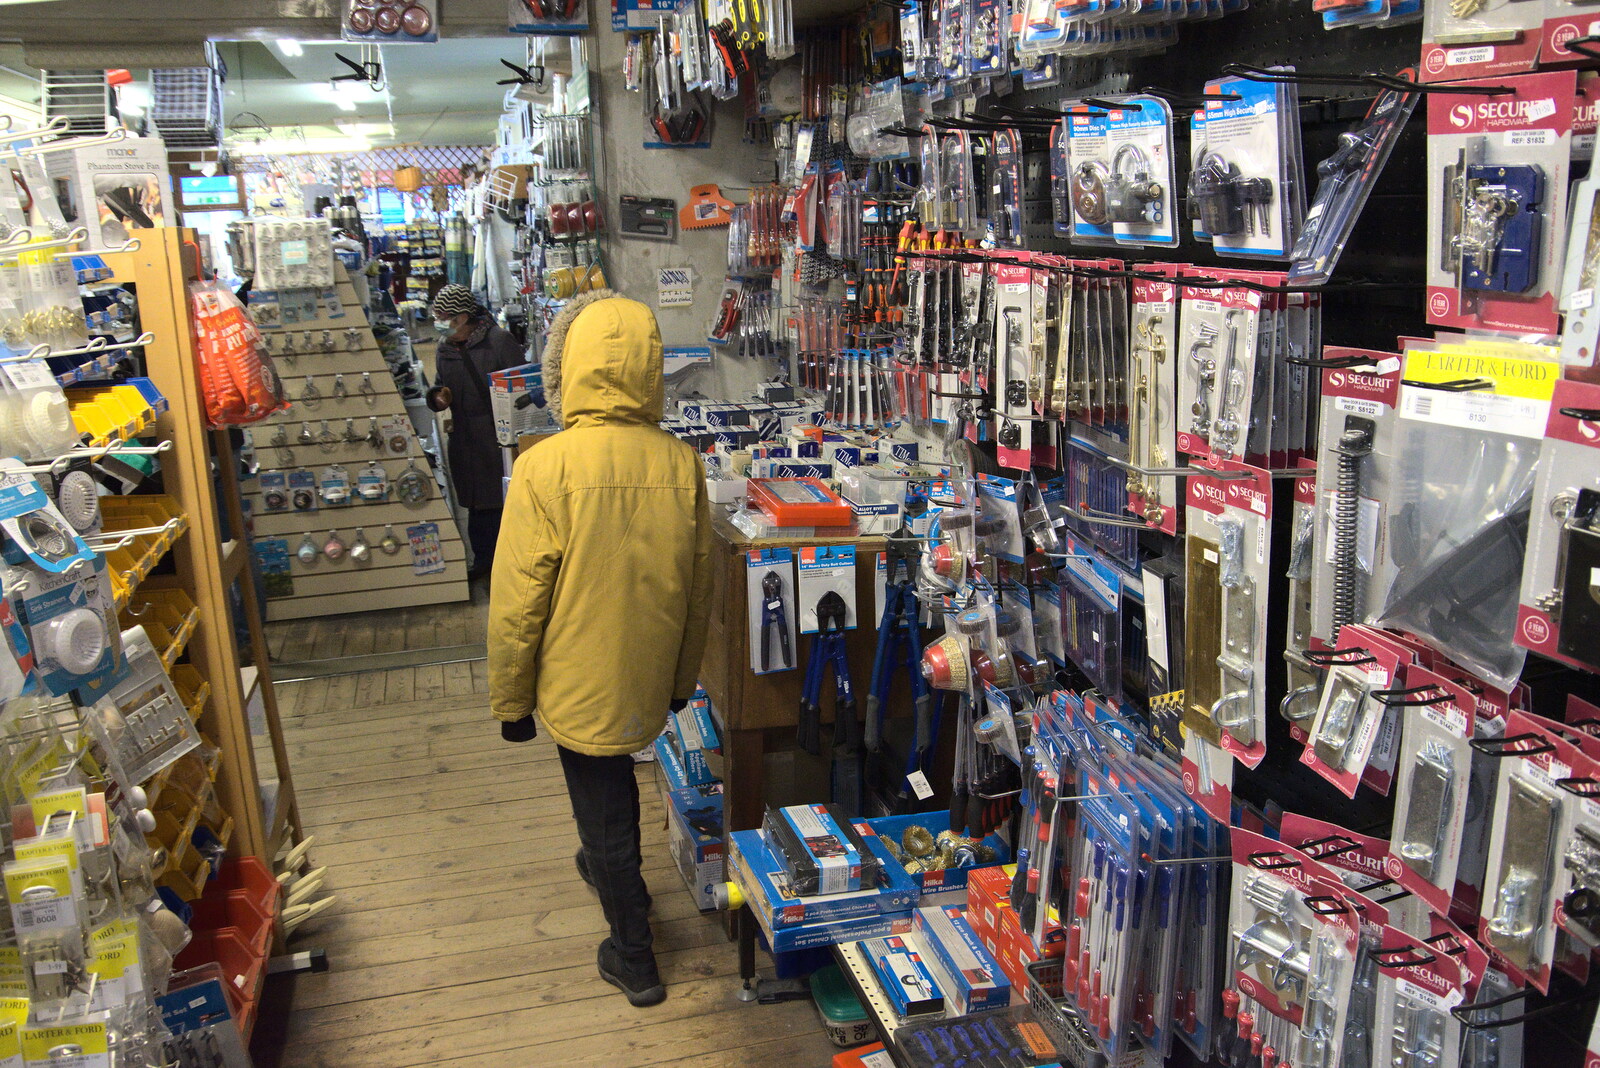 Harry roams around in the hardware shop from GSB Carols and Beer With the Lads, Thornham and Thorndon, Suffolk  - 18th December 2021